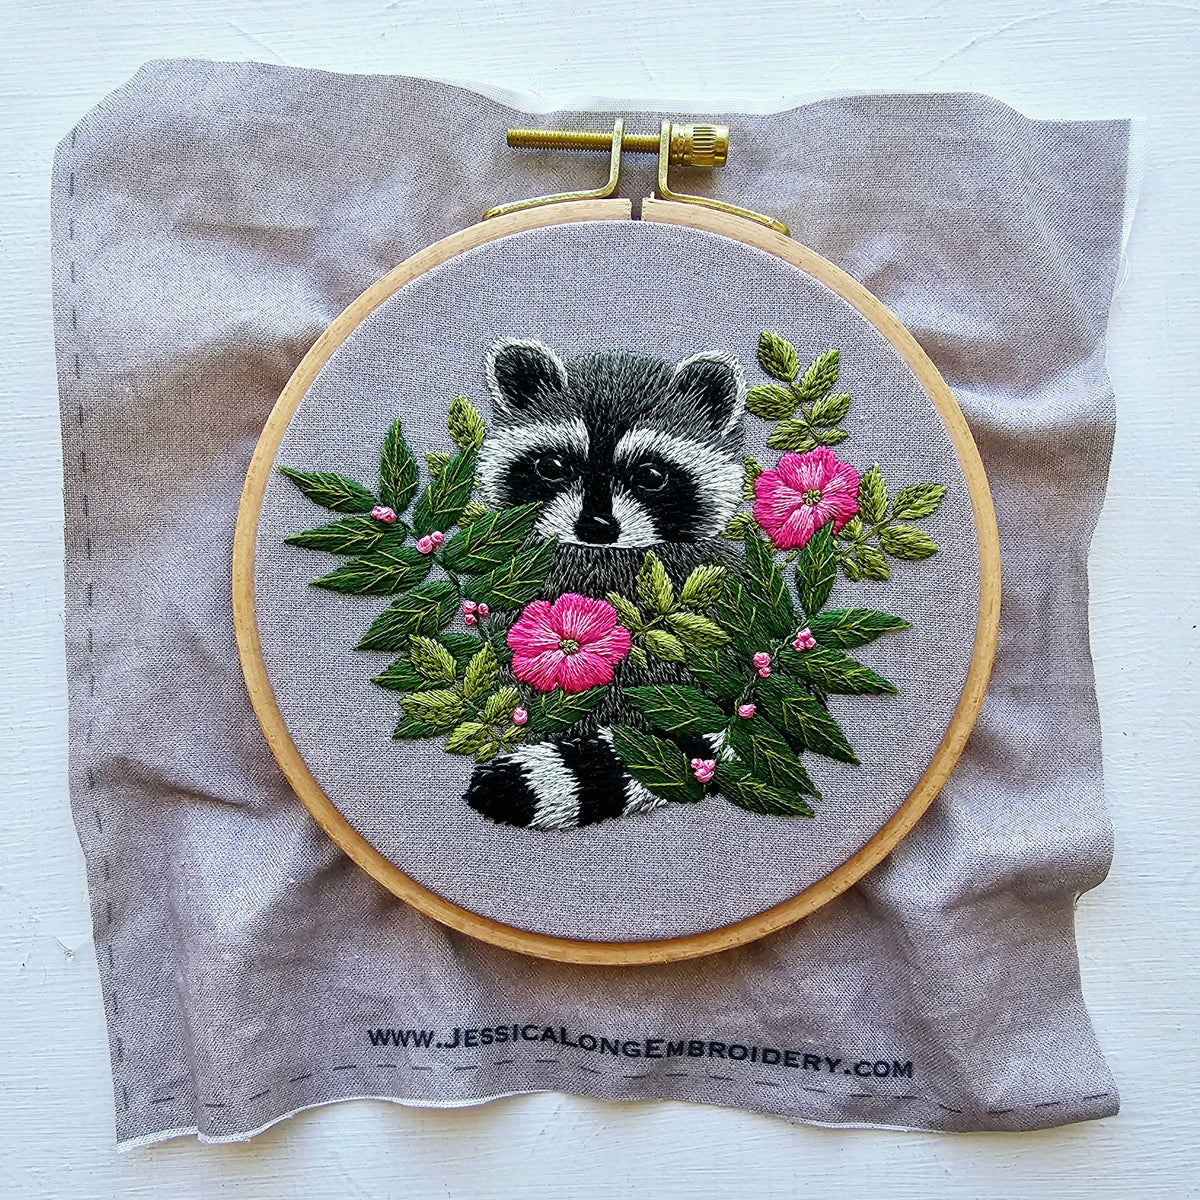 Jessica Long Embroidery Raccoon hand embroidery kit